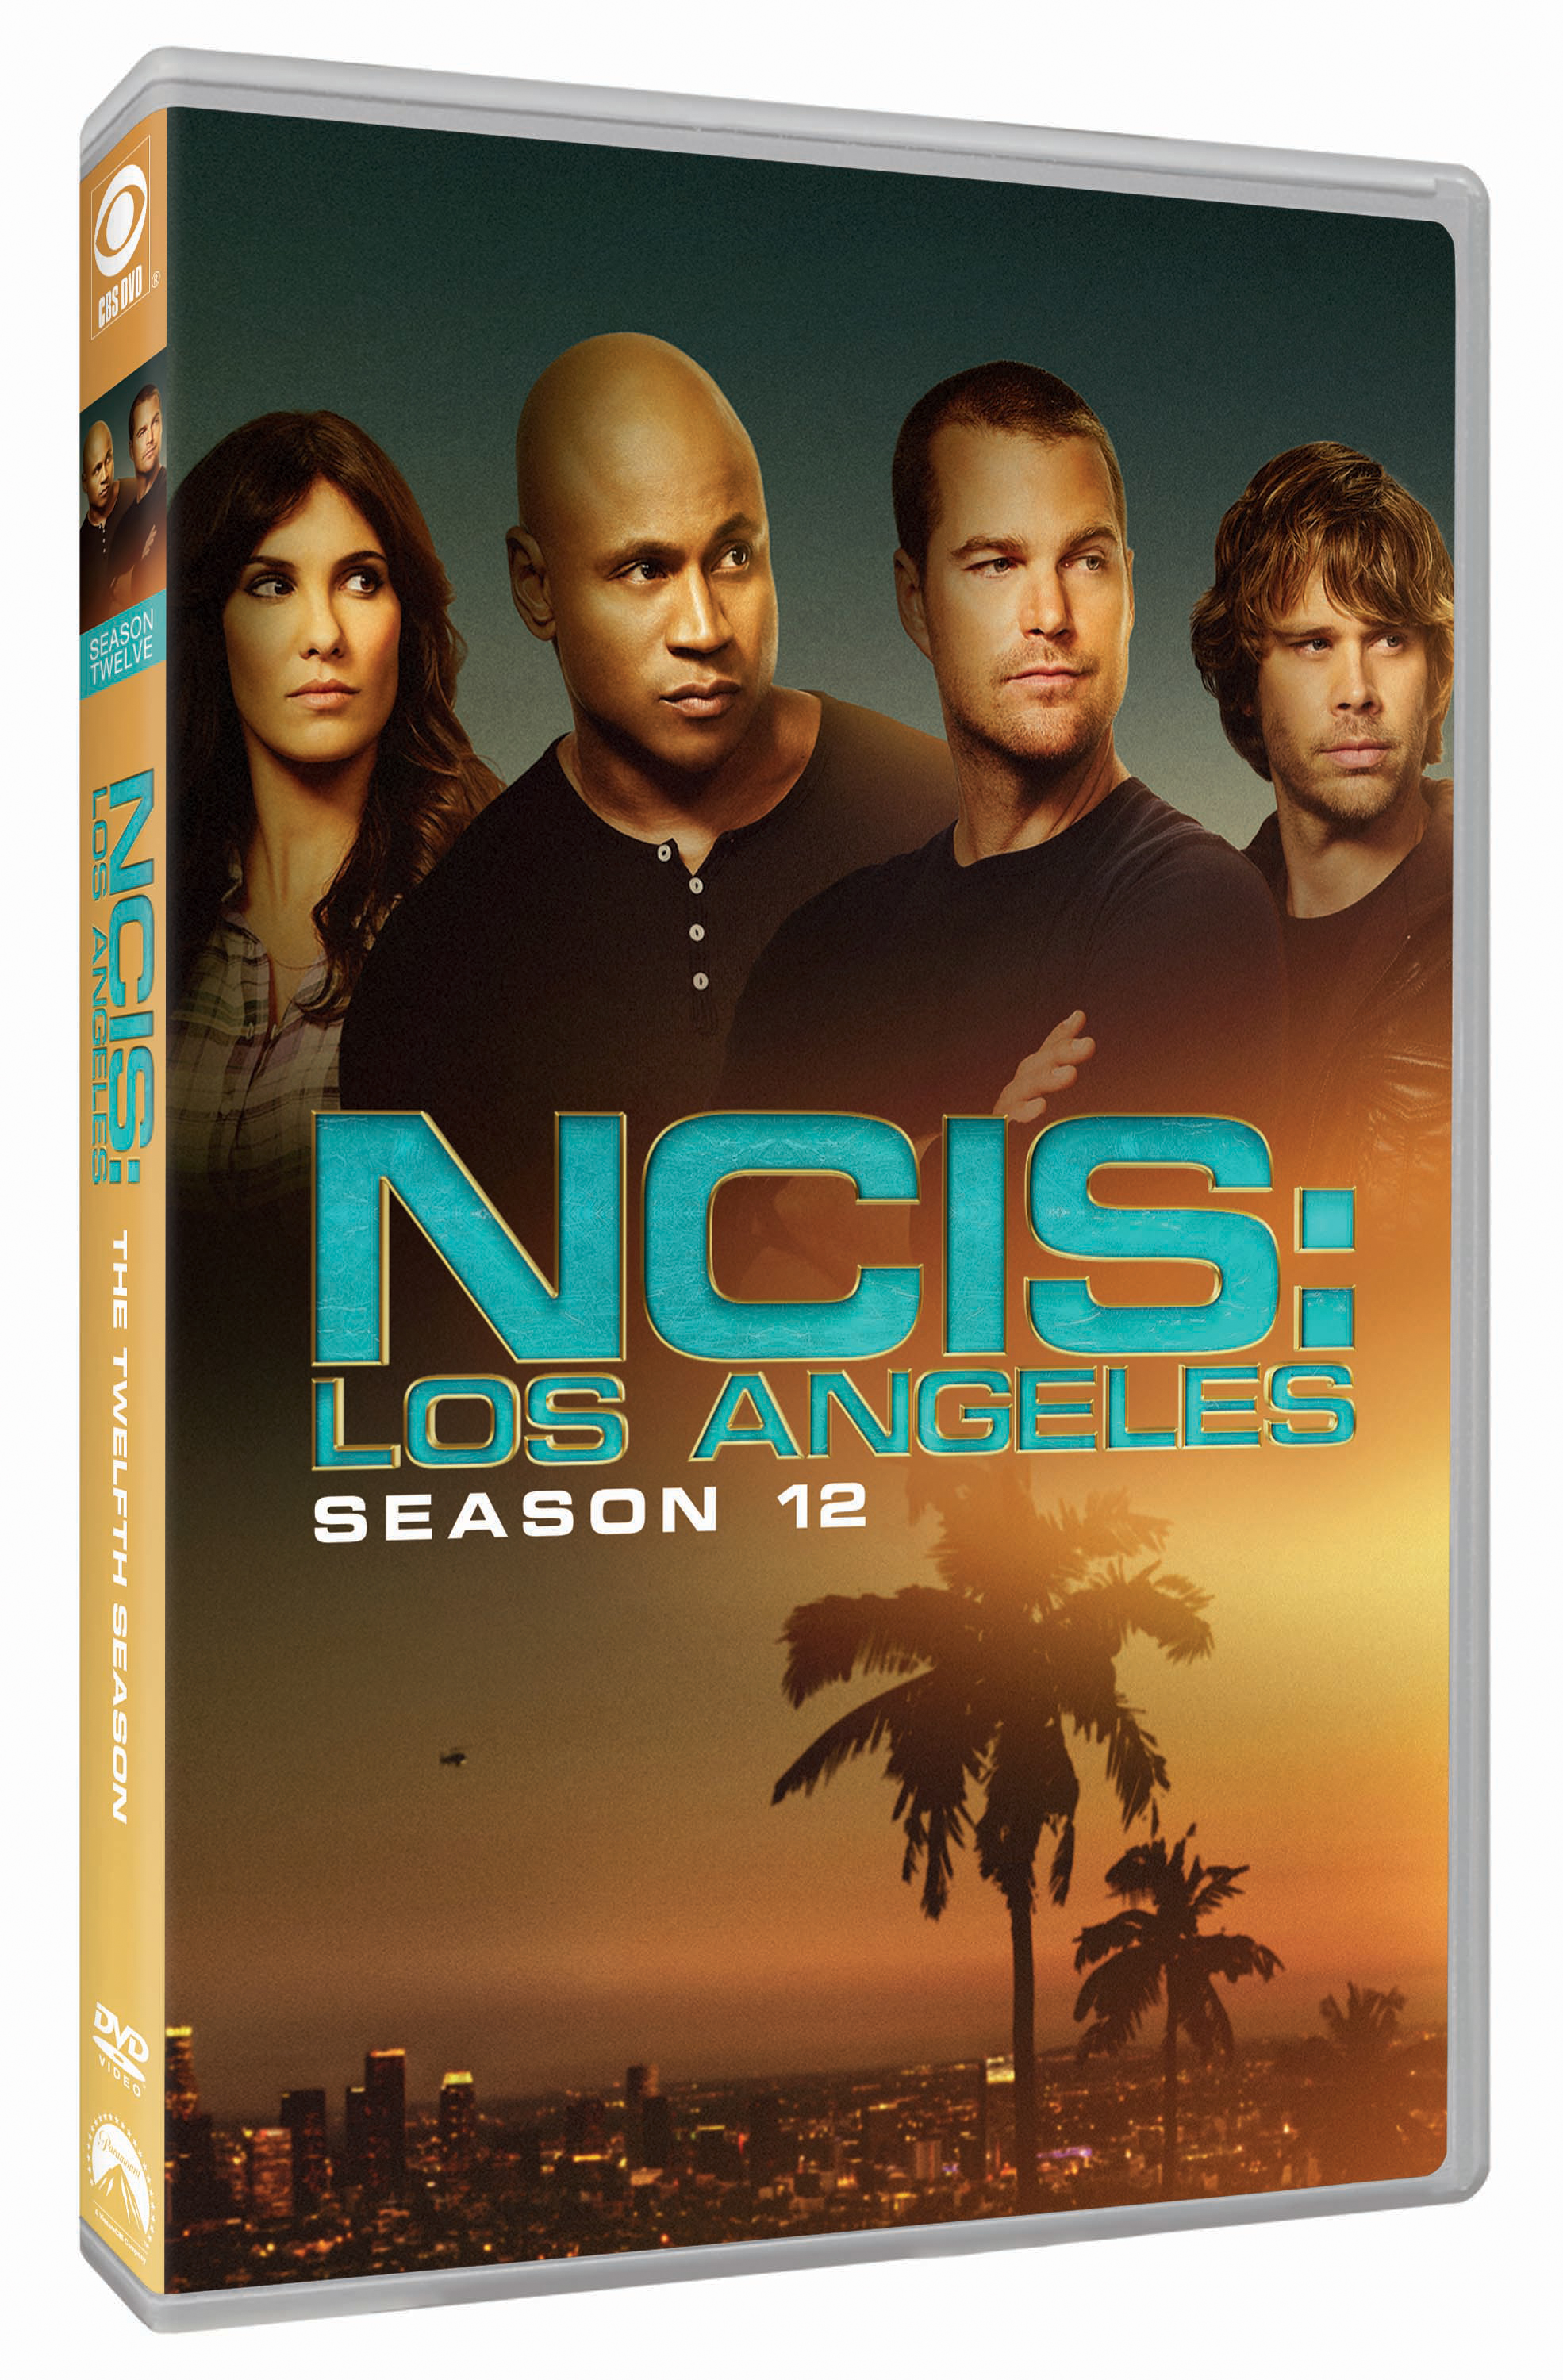 Paramount NCIS: New Orleans: The Complete Series (DVD)